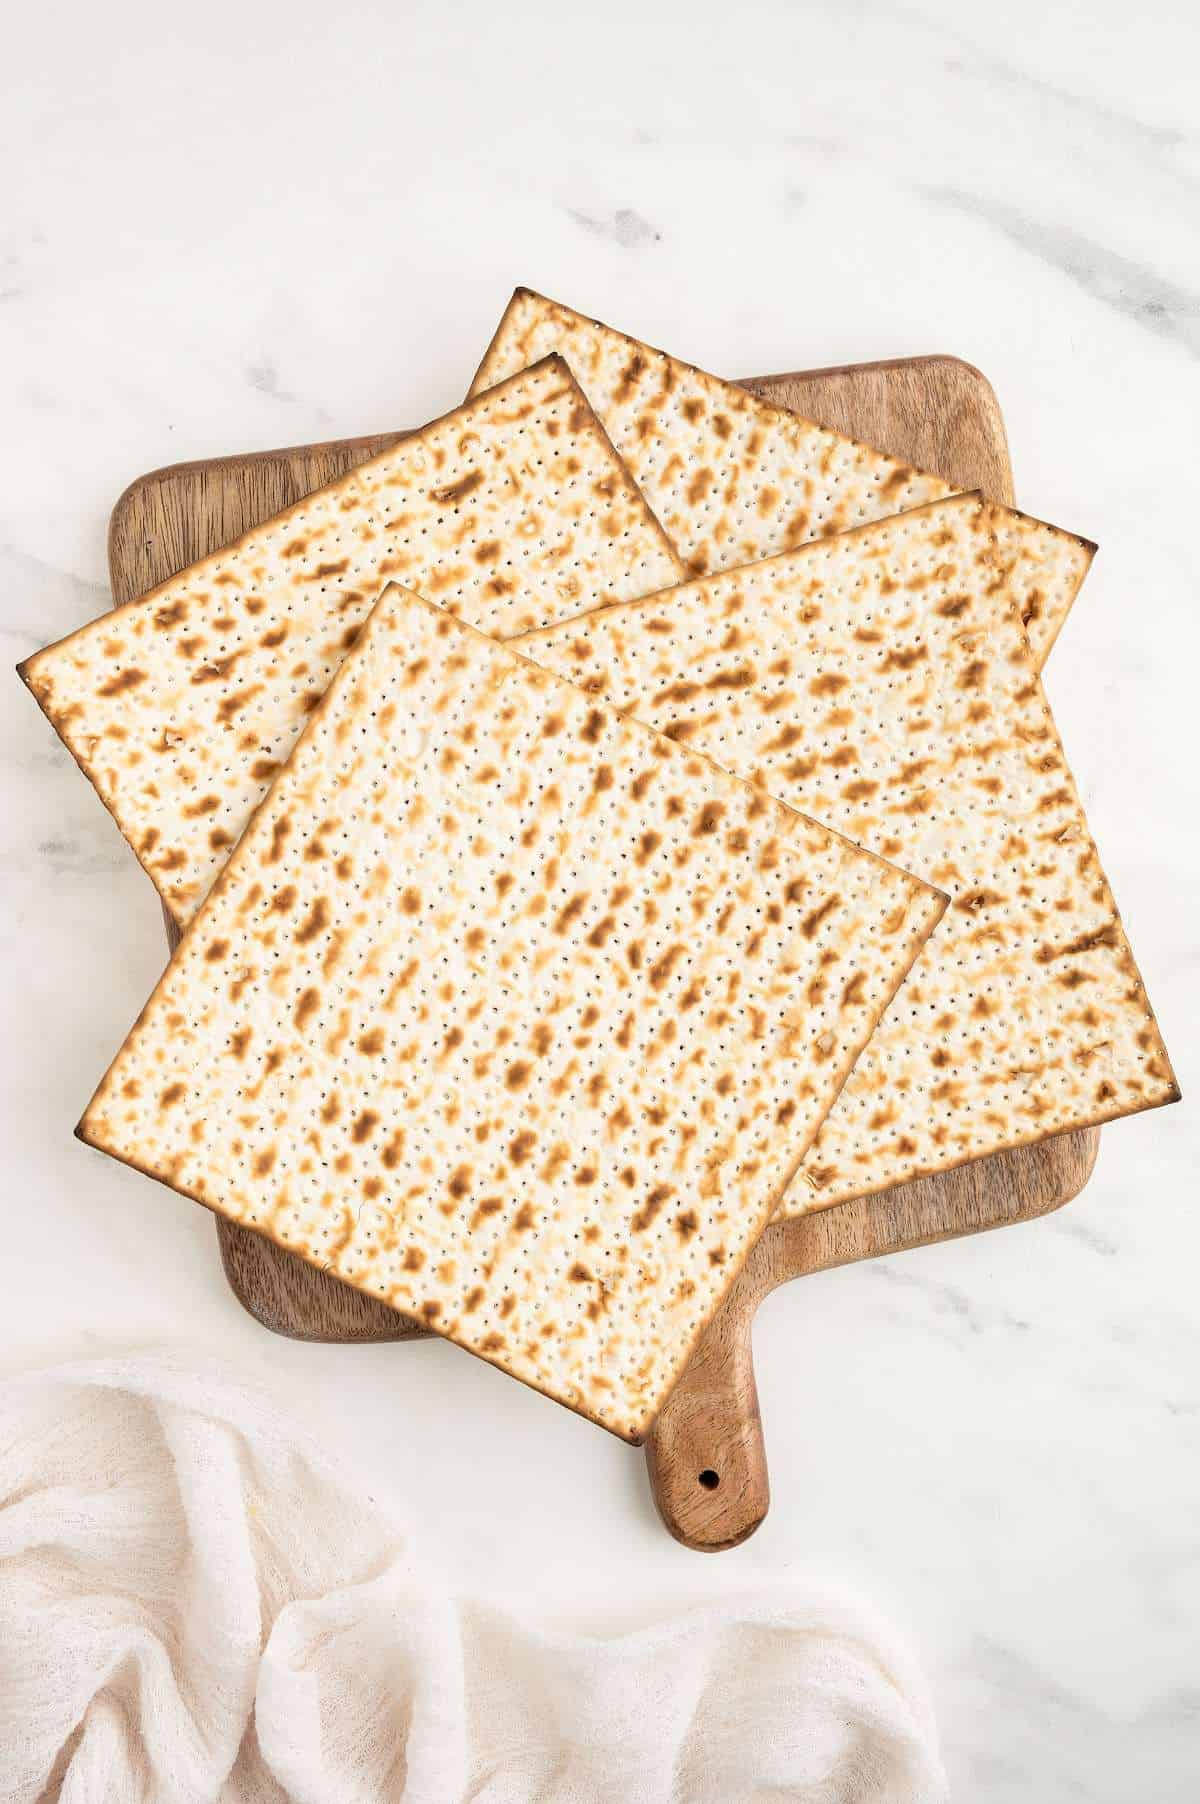 Matzah crackers in a stack on top of a wooden pizza tray.